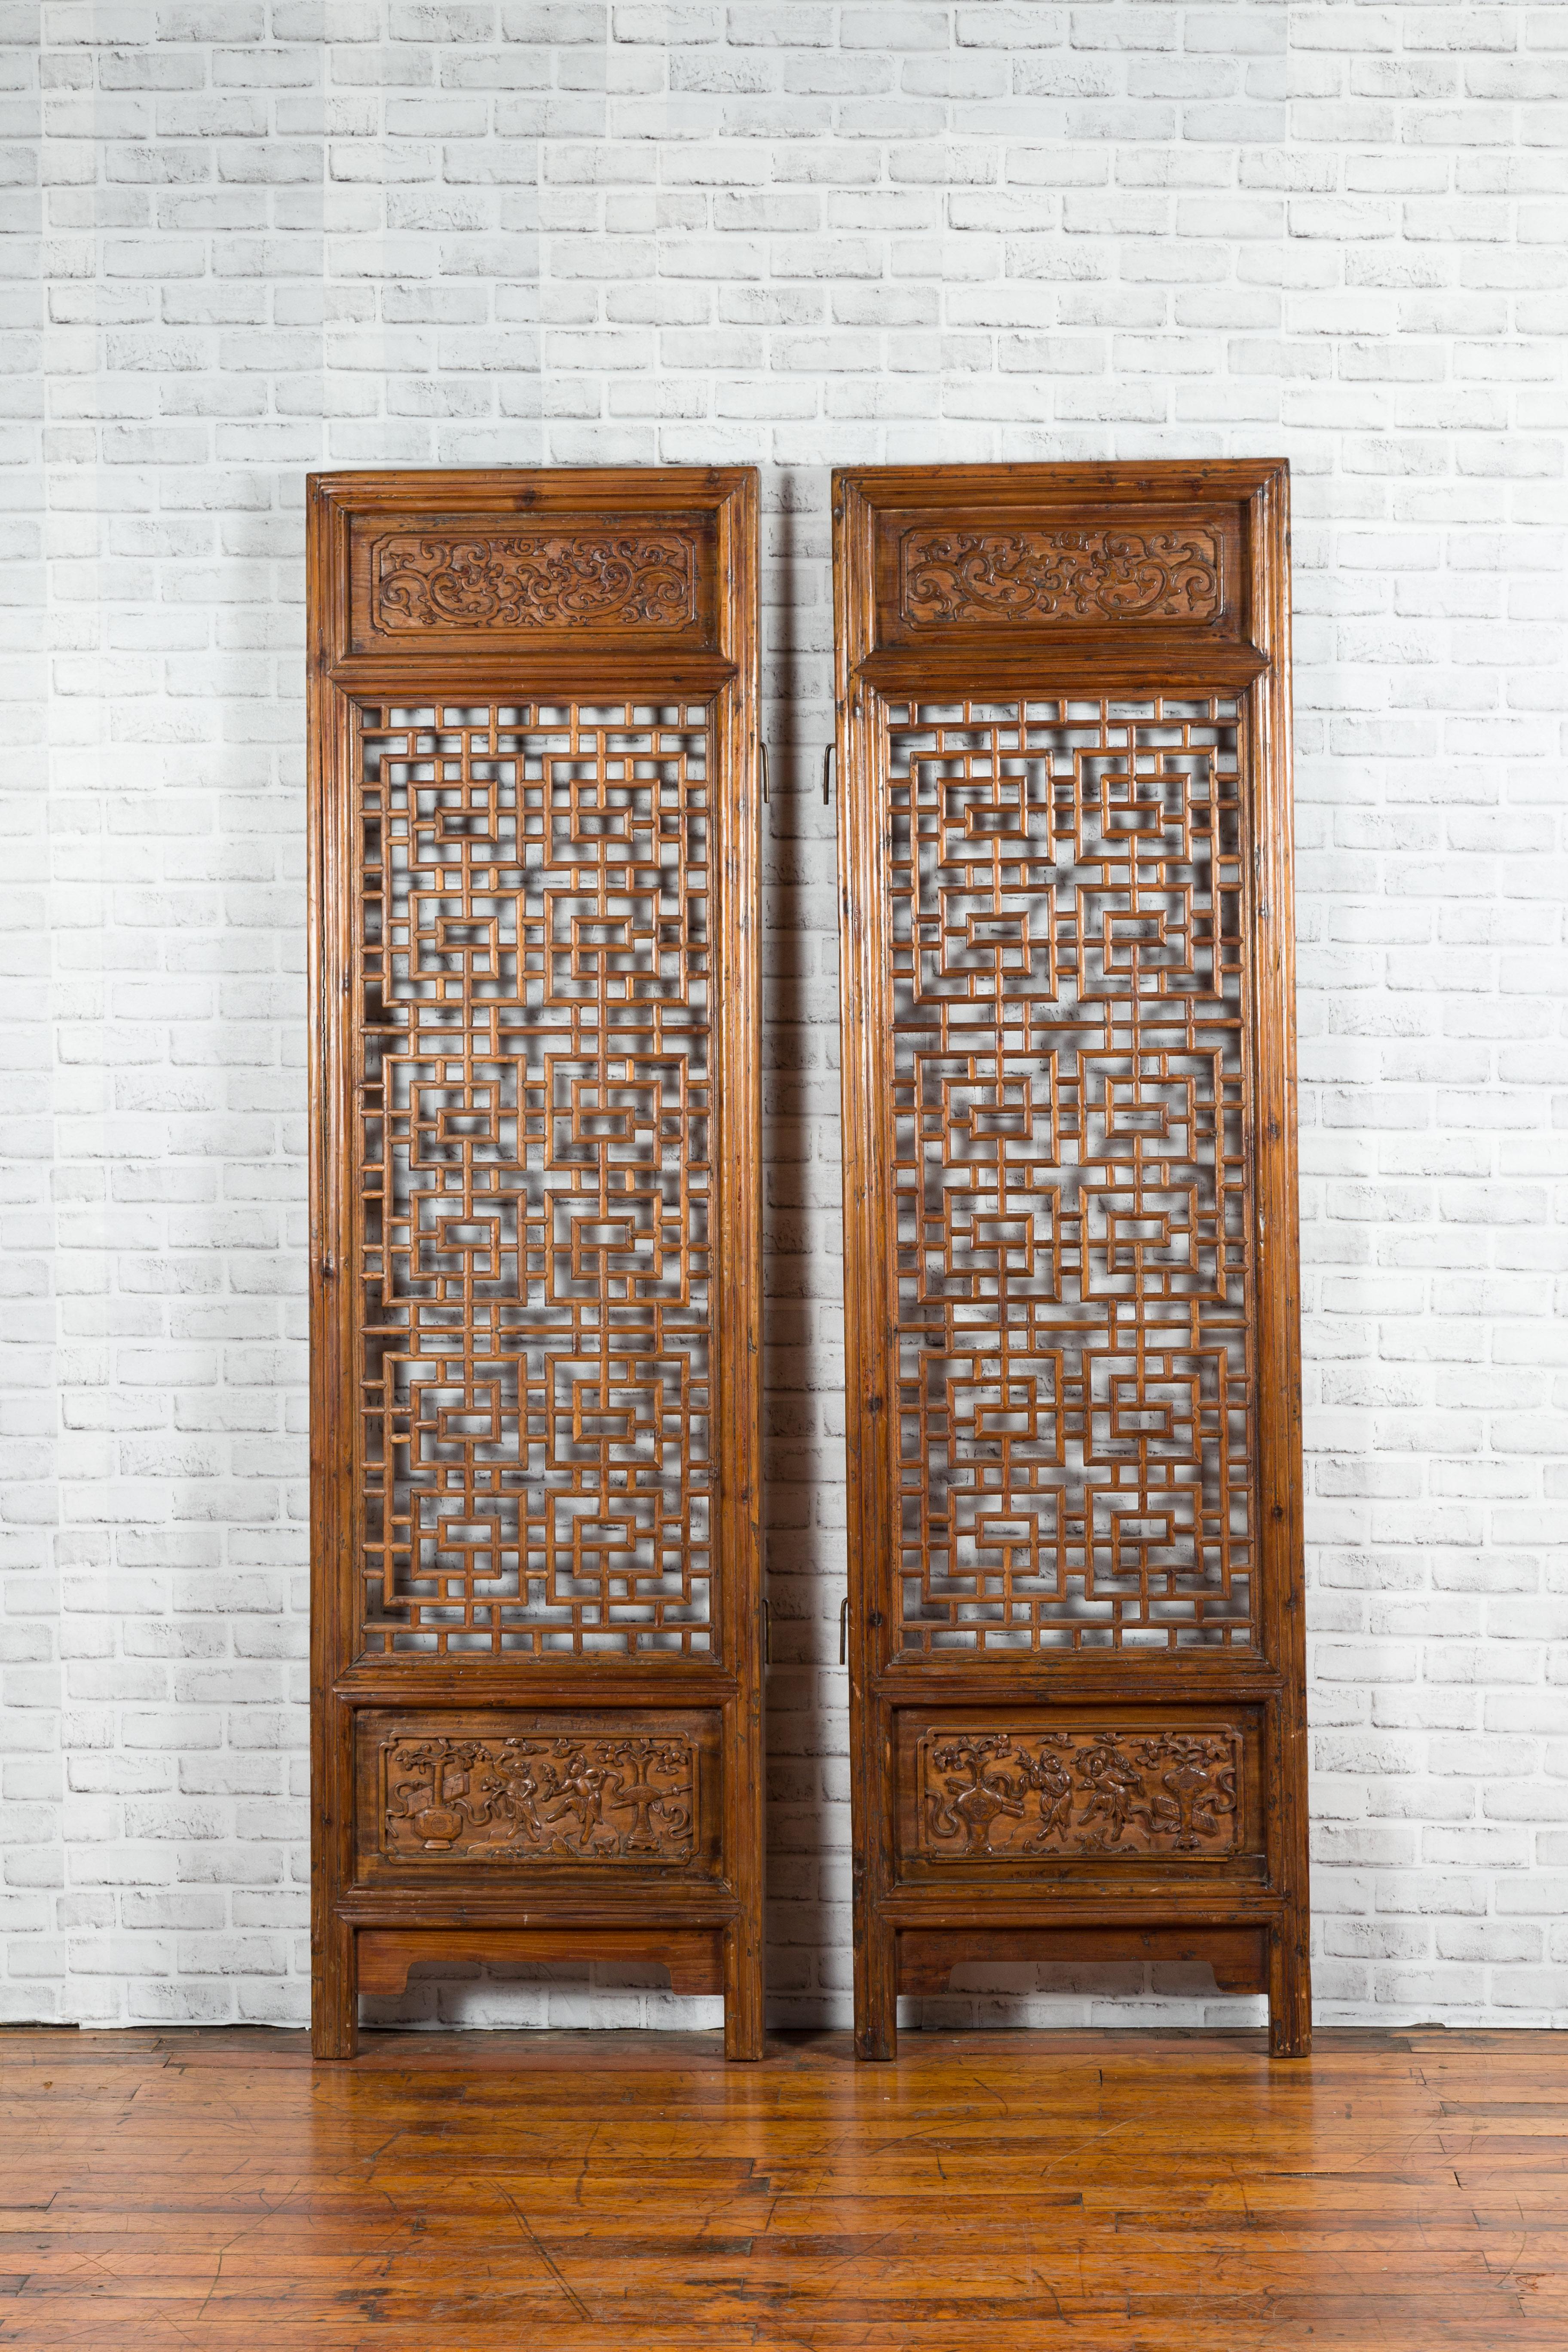 A pair of Chinese antique carved screens from the 19th century, with fretwork motifs and low-relief panels. Created in China, each of this pair of wooden screens attracts our attention with their fretwork design surrounded by carved panels. The